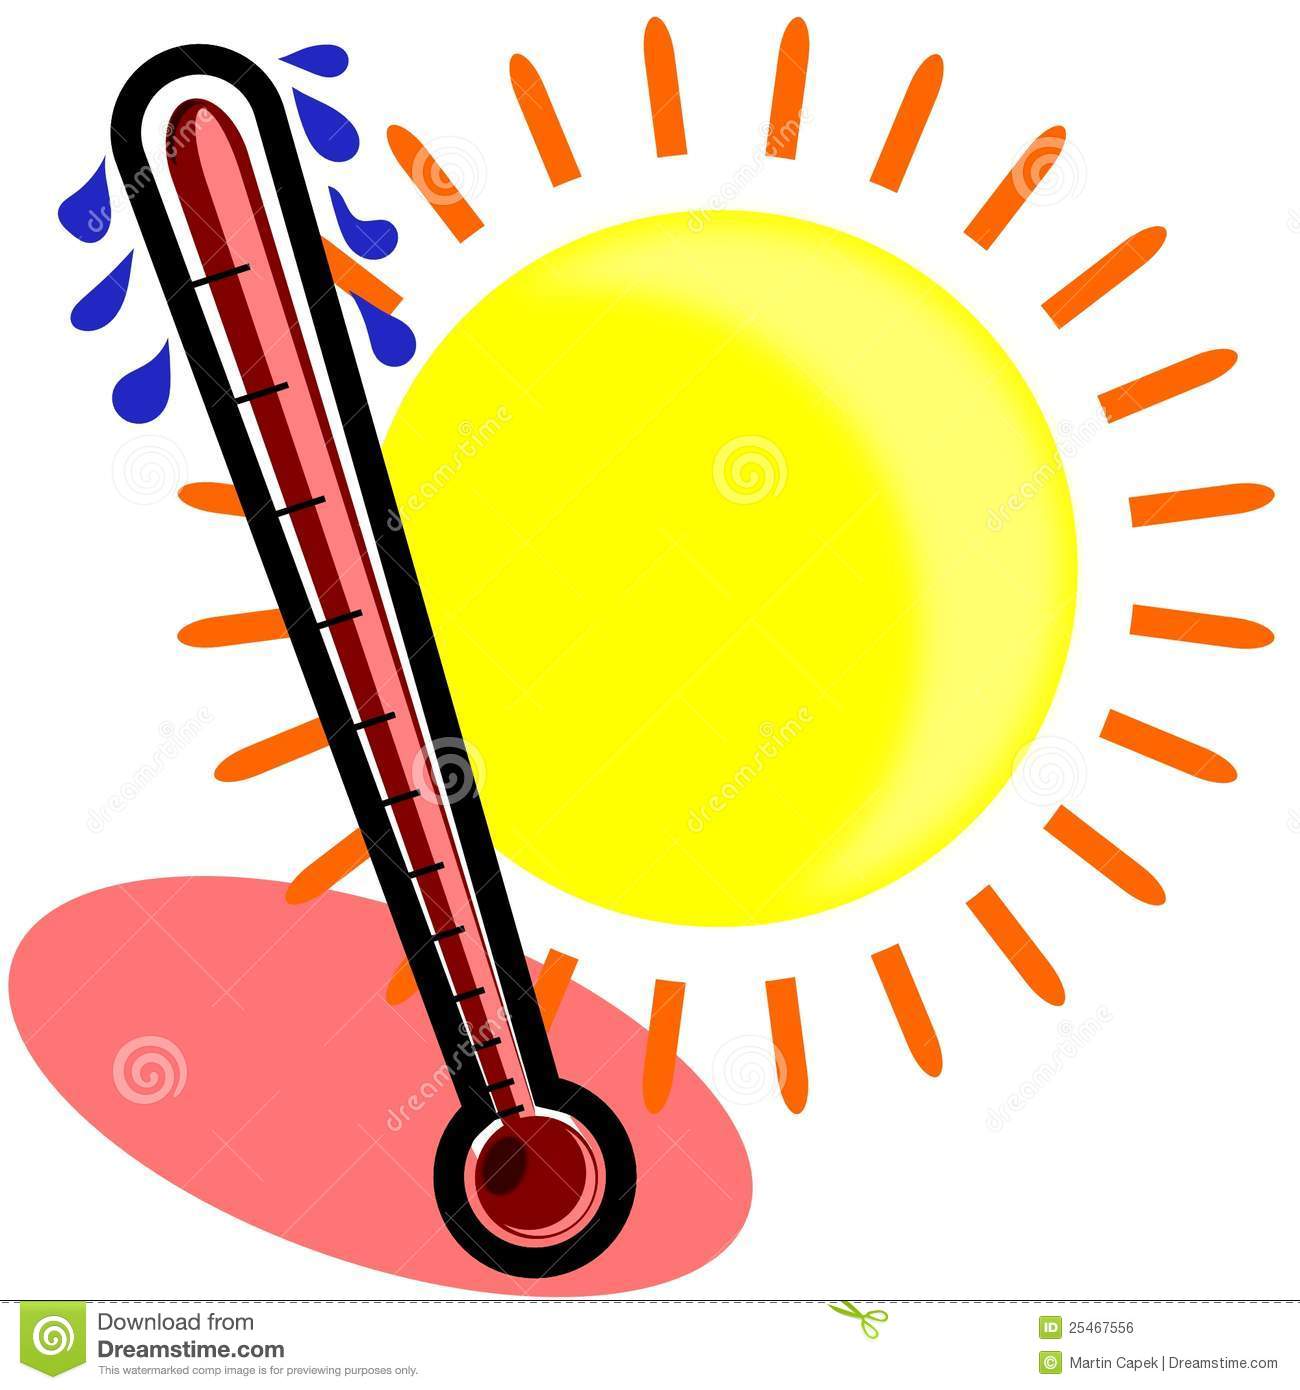 Thermometer warm clipart.